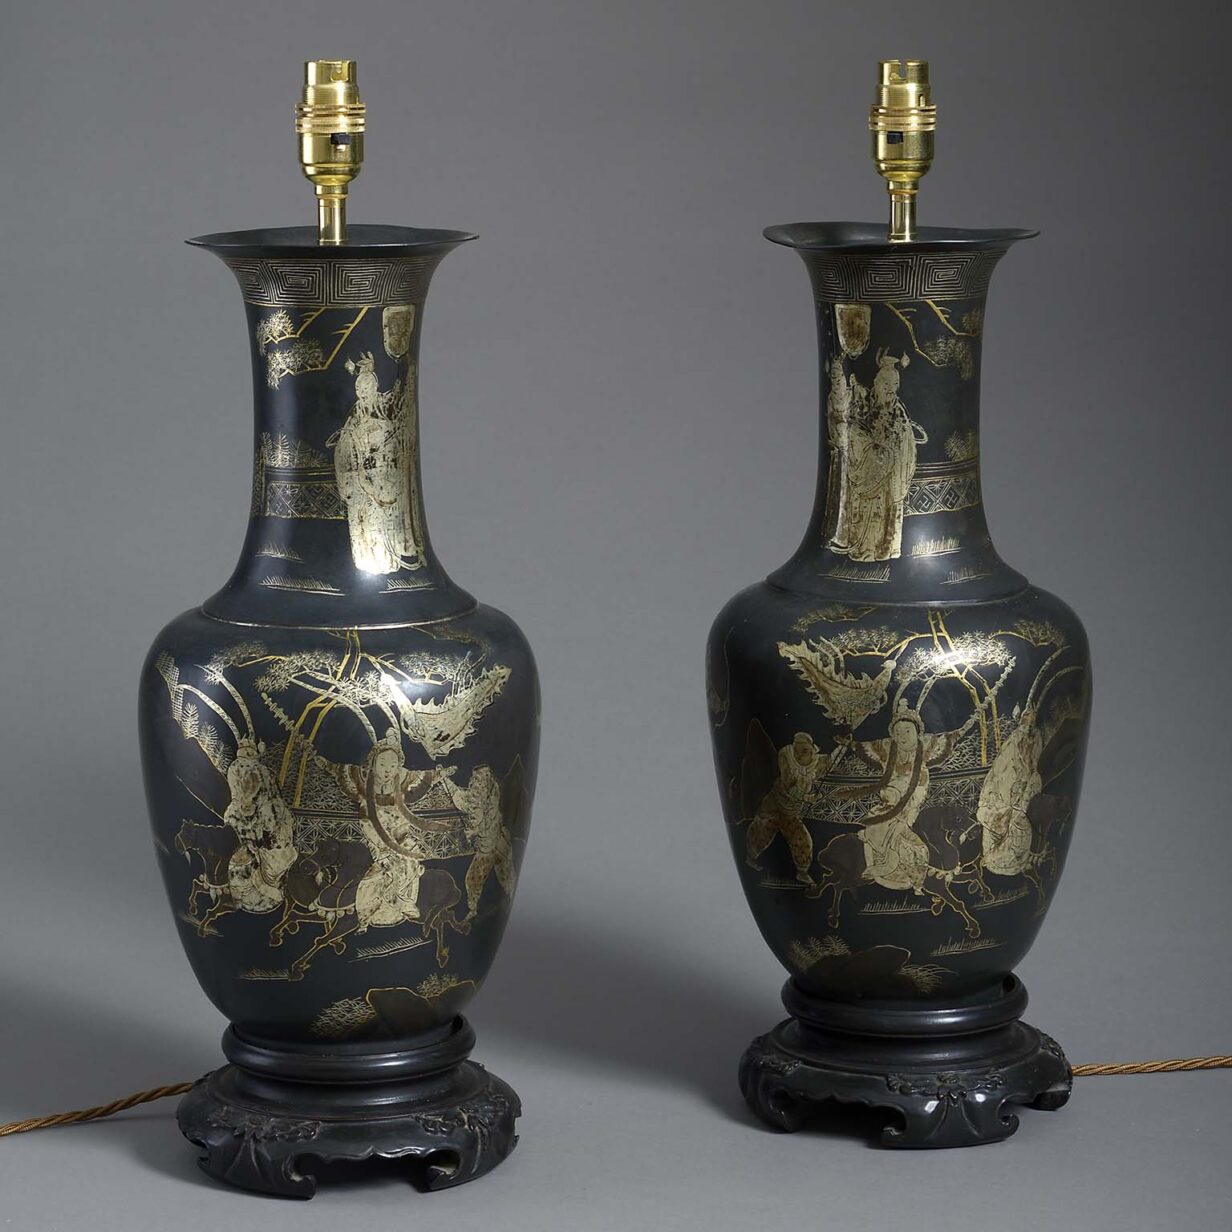 Pair of chinese export lacquer lamps